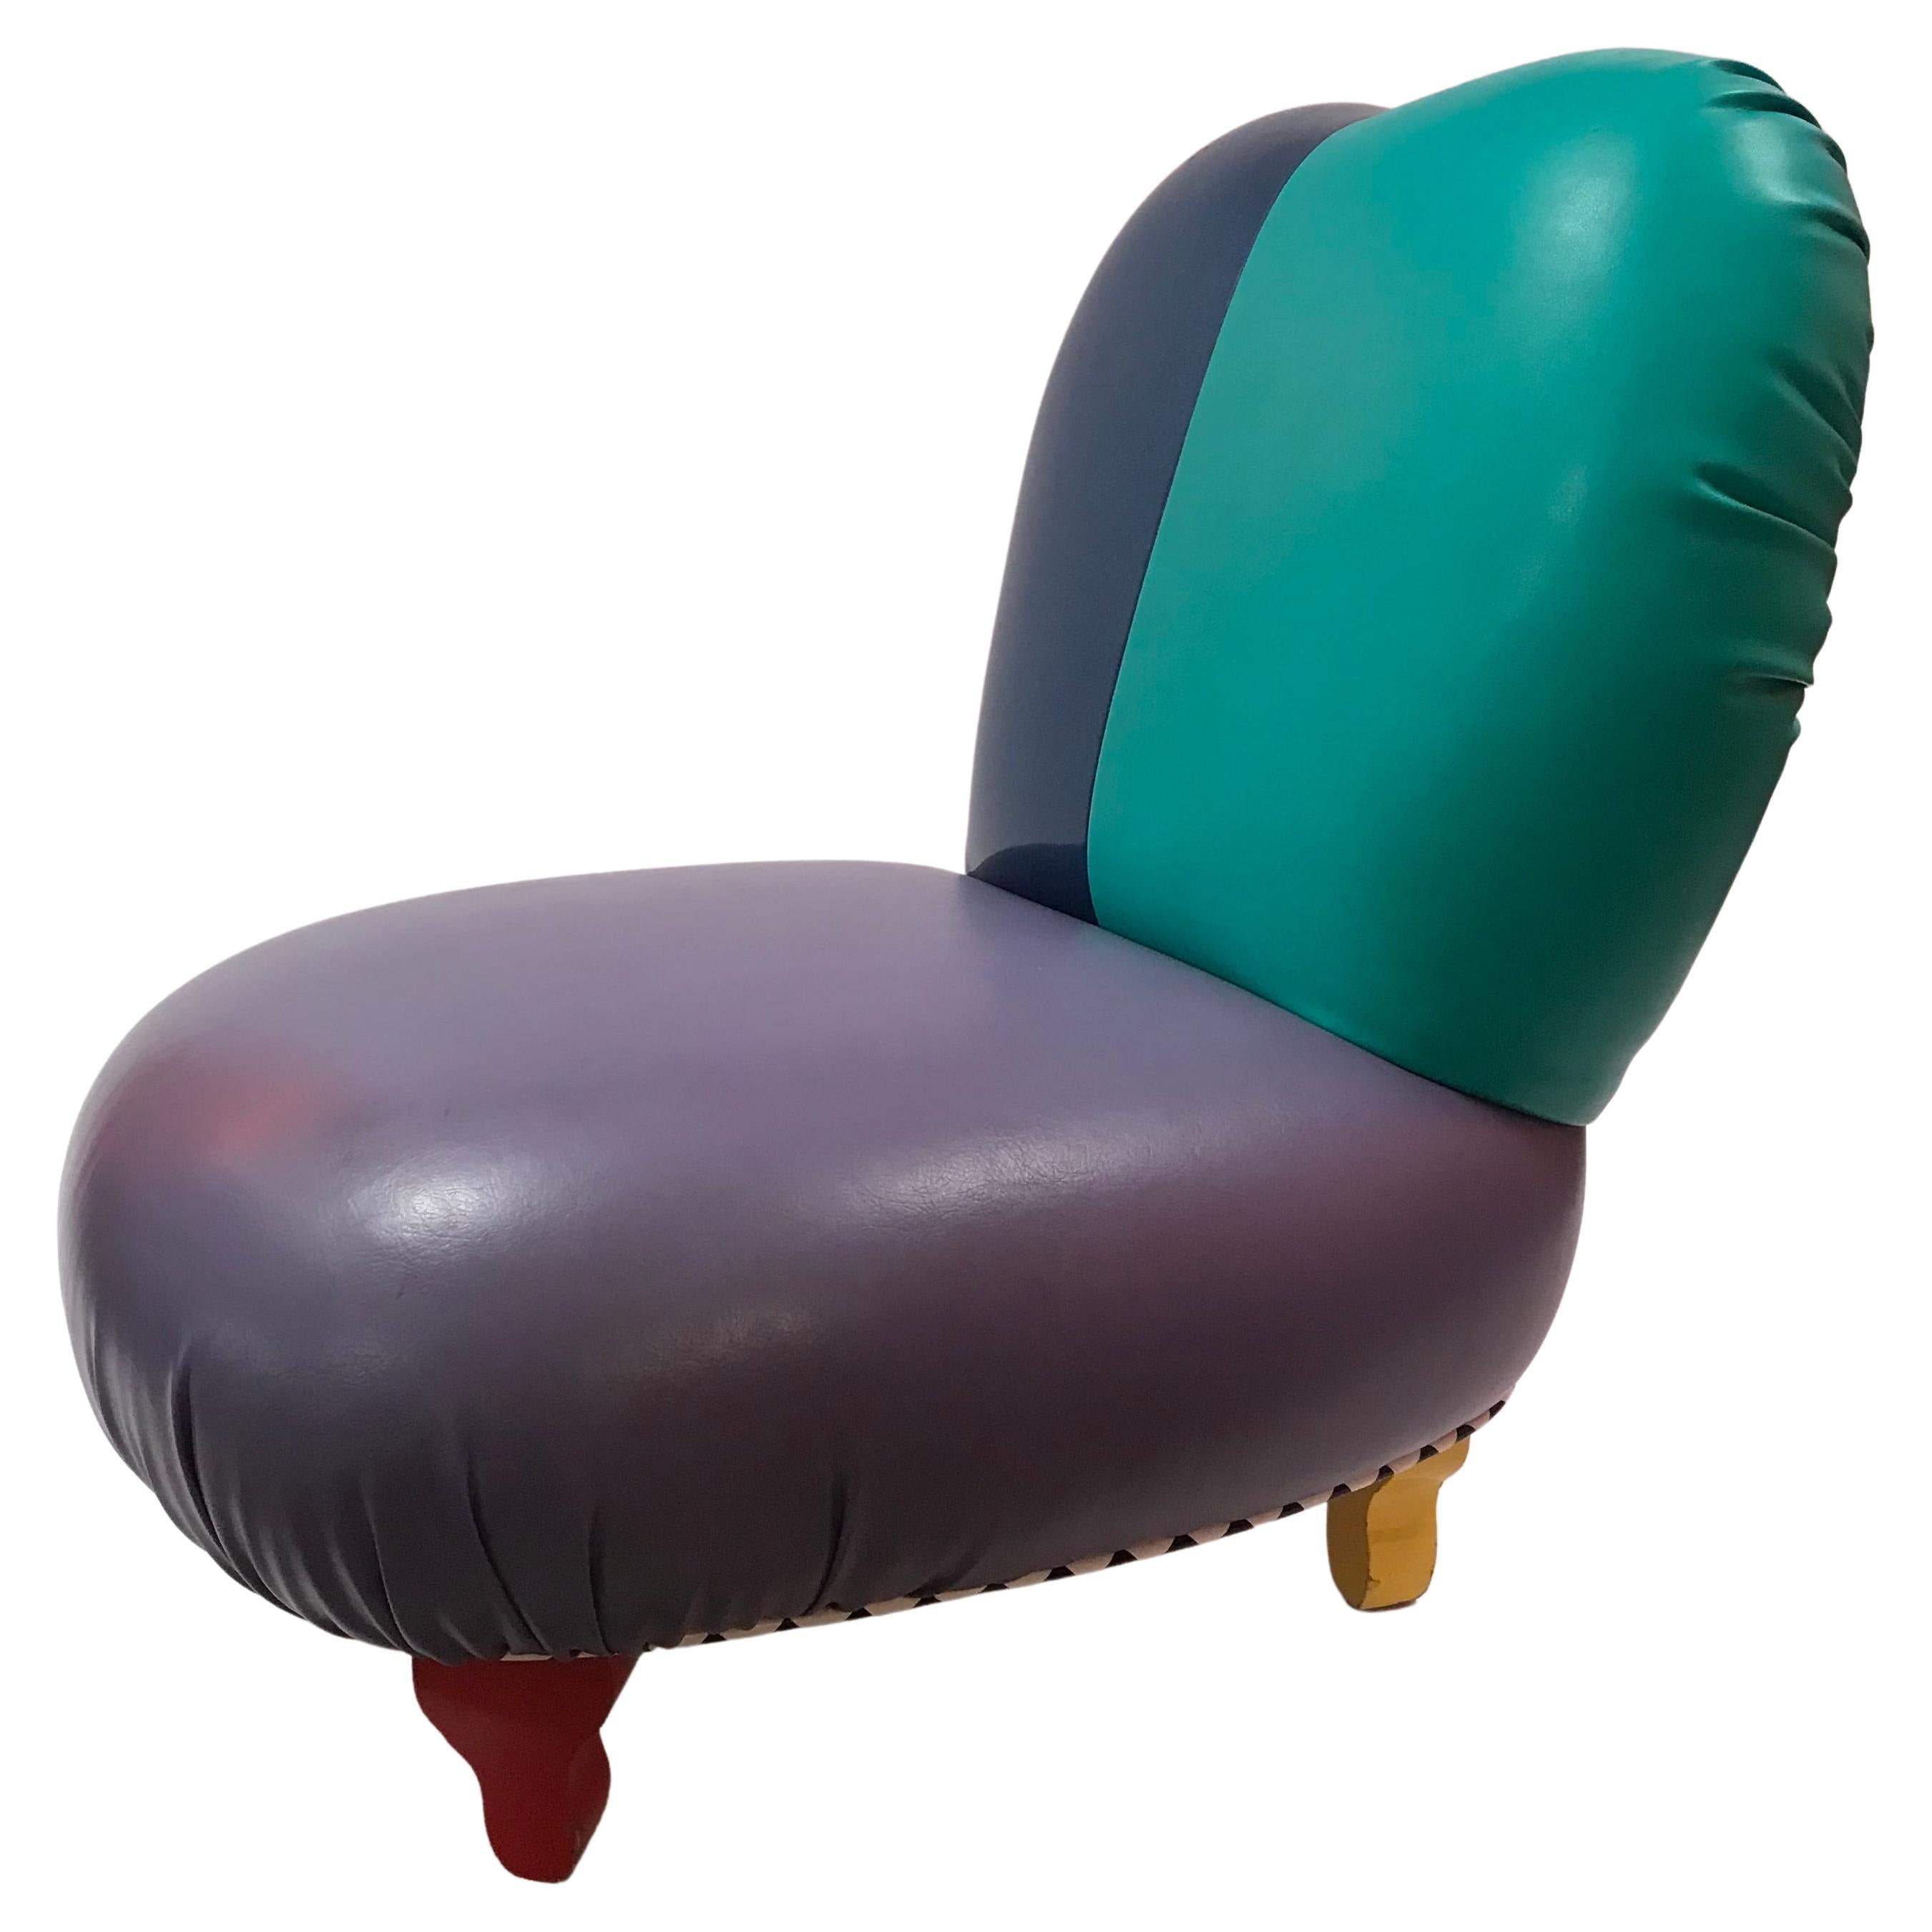 1980's Harry Siegel Memphis Inspired Club Chair in Multicolor Faux Leather For Sale